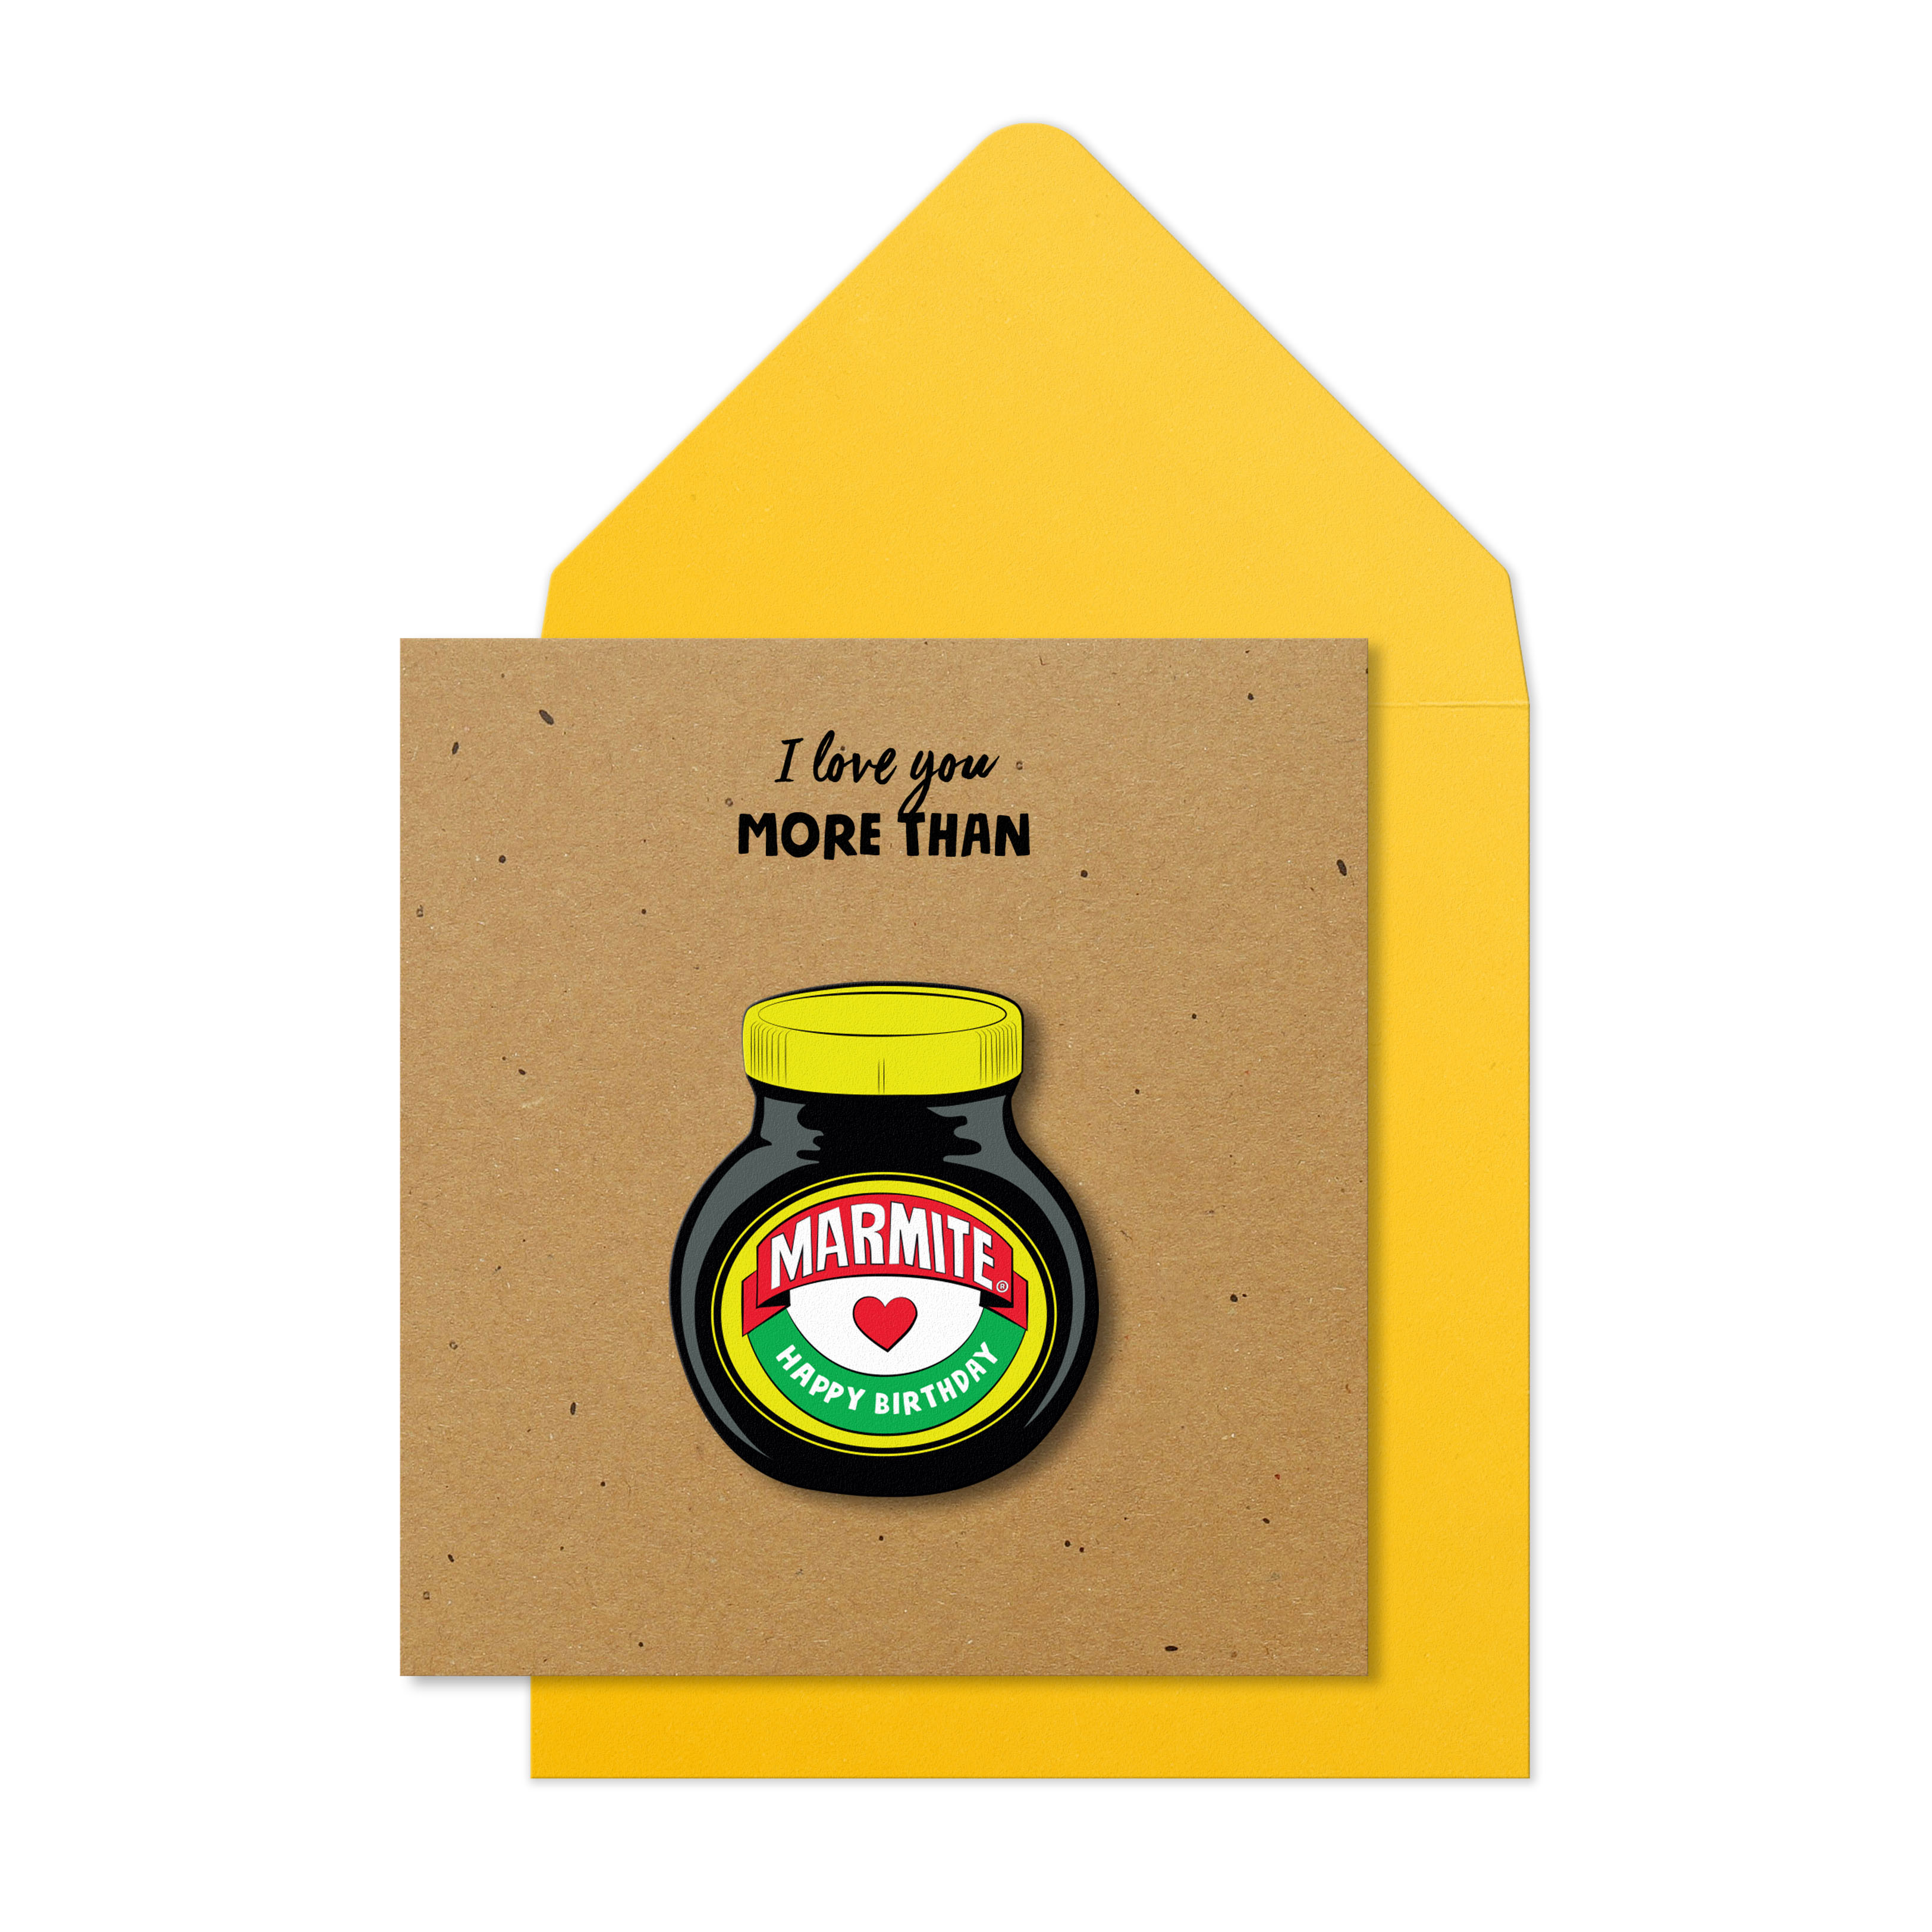 Above: The popularity of Tache’s original Marmite design sparked the licensing agreement with Unilever resulting in this officially-licensed design